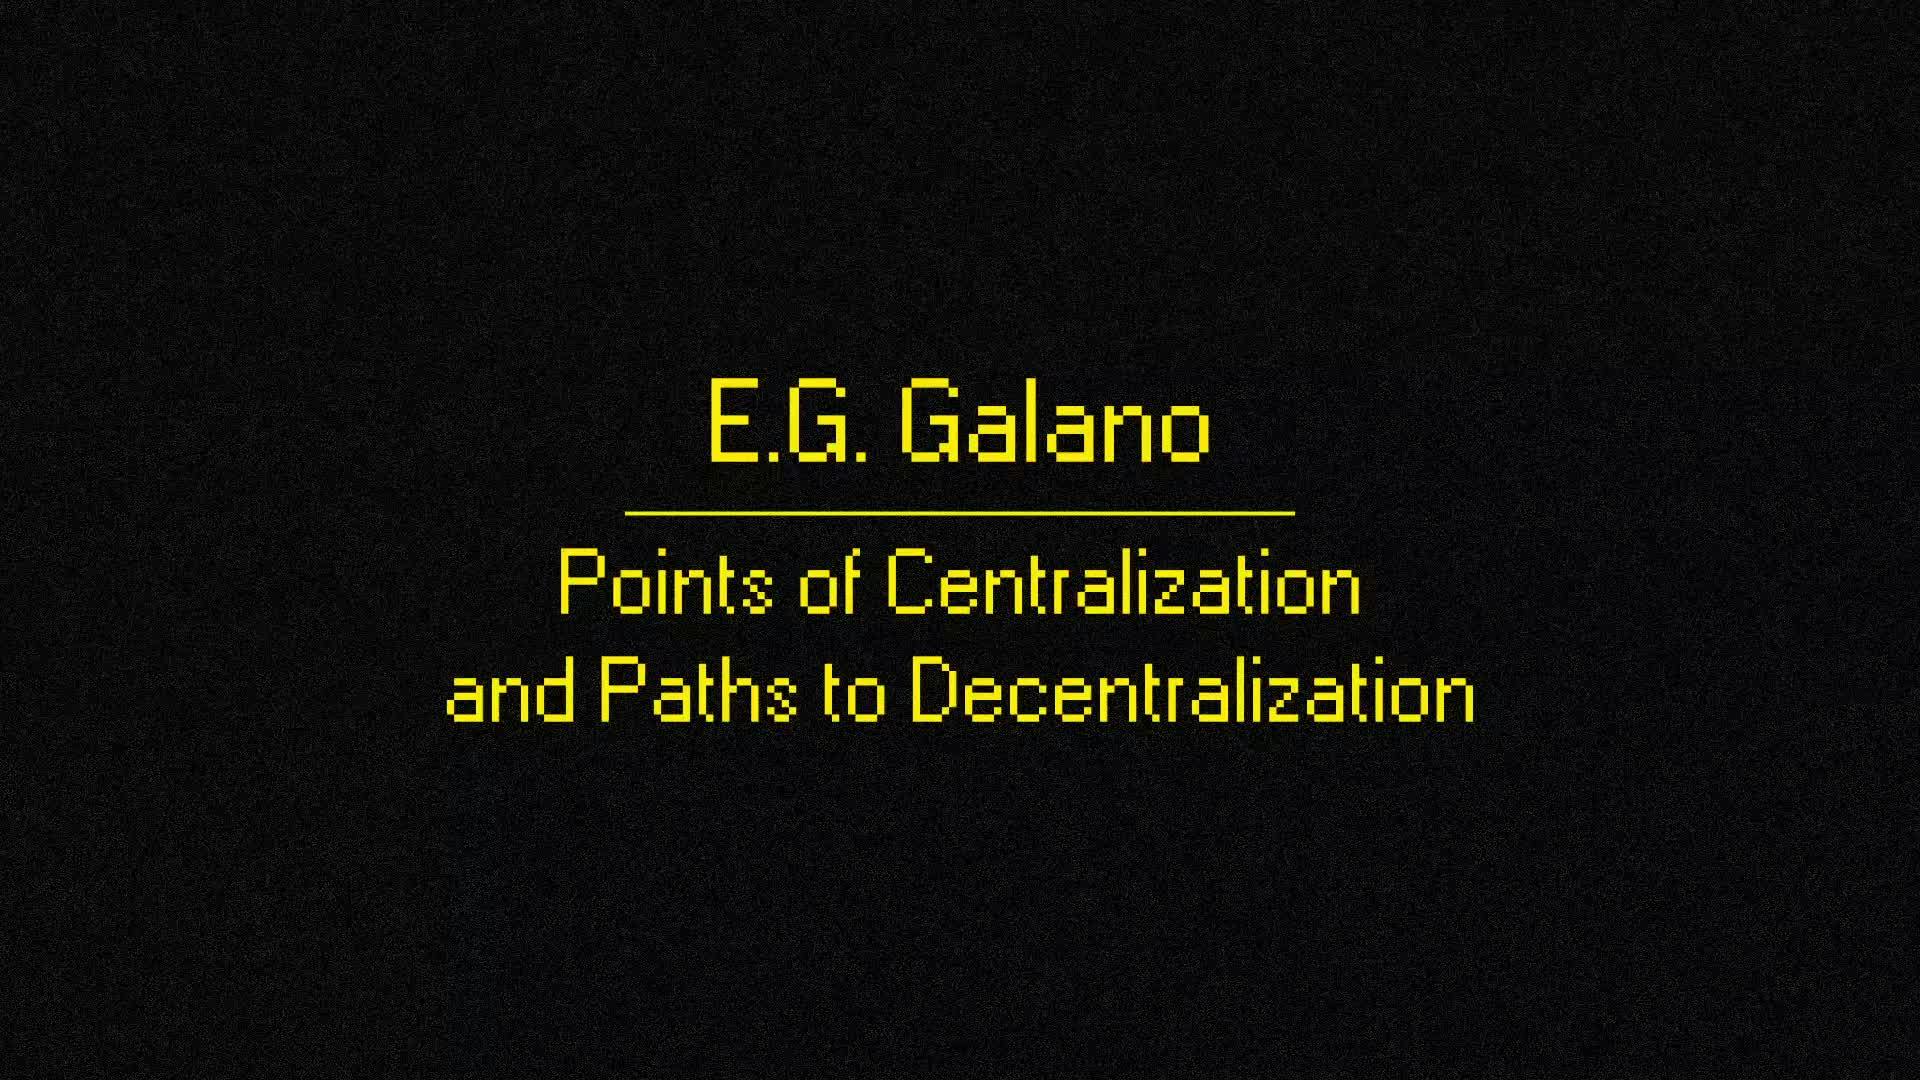 Points of Centralization and Paths to Decentralization 